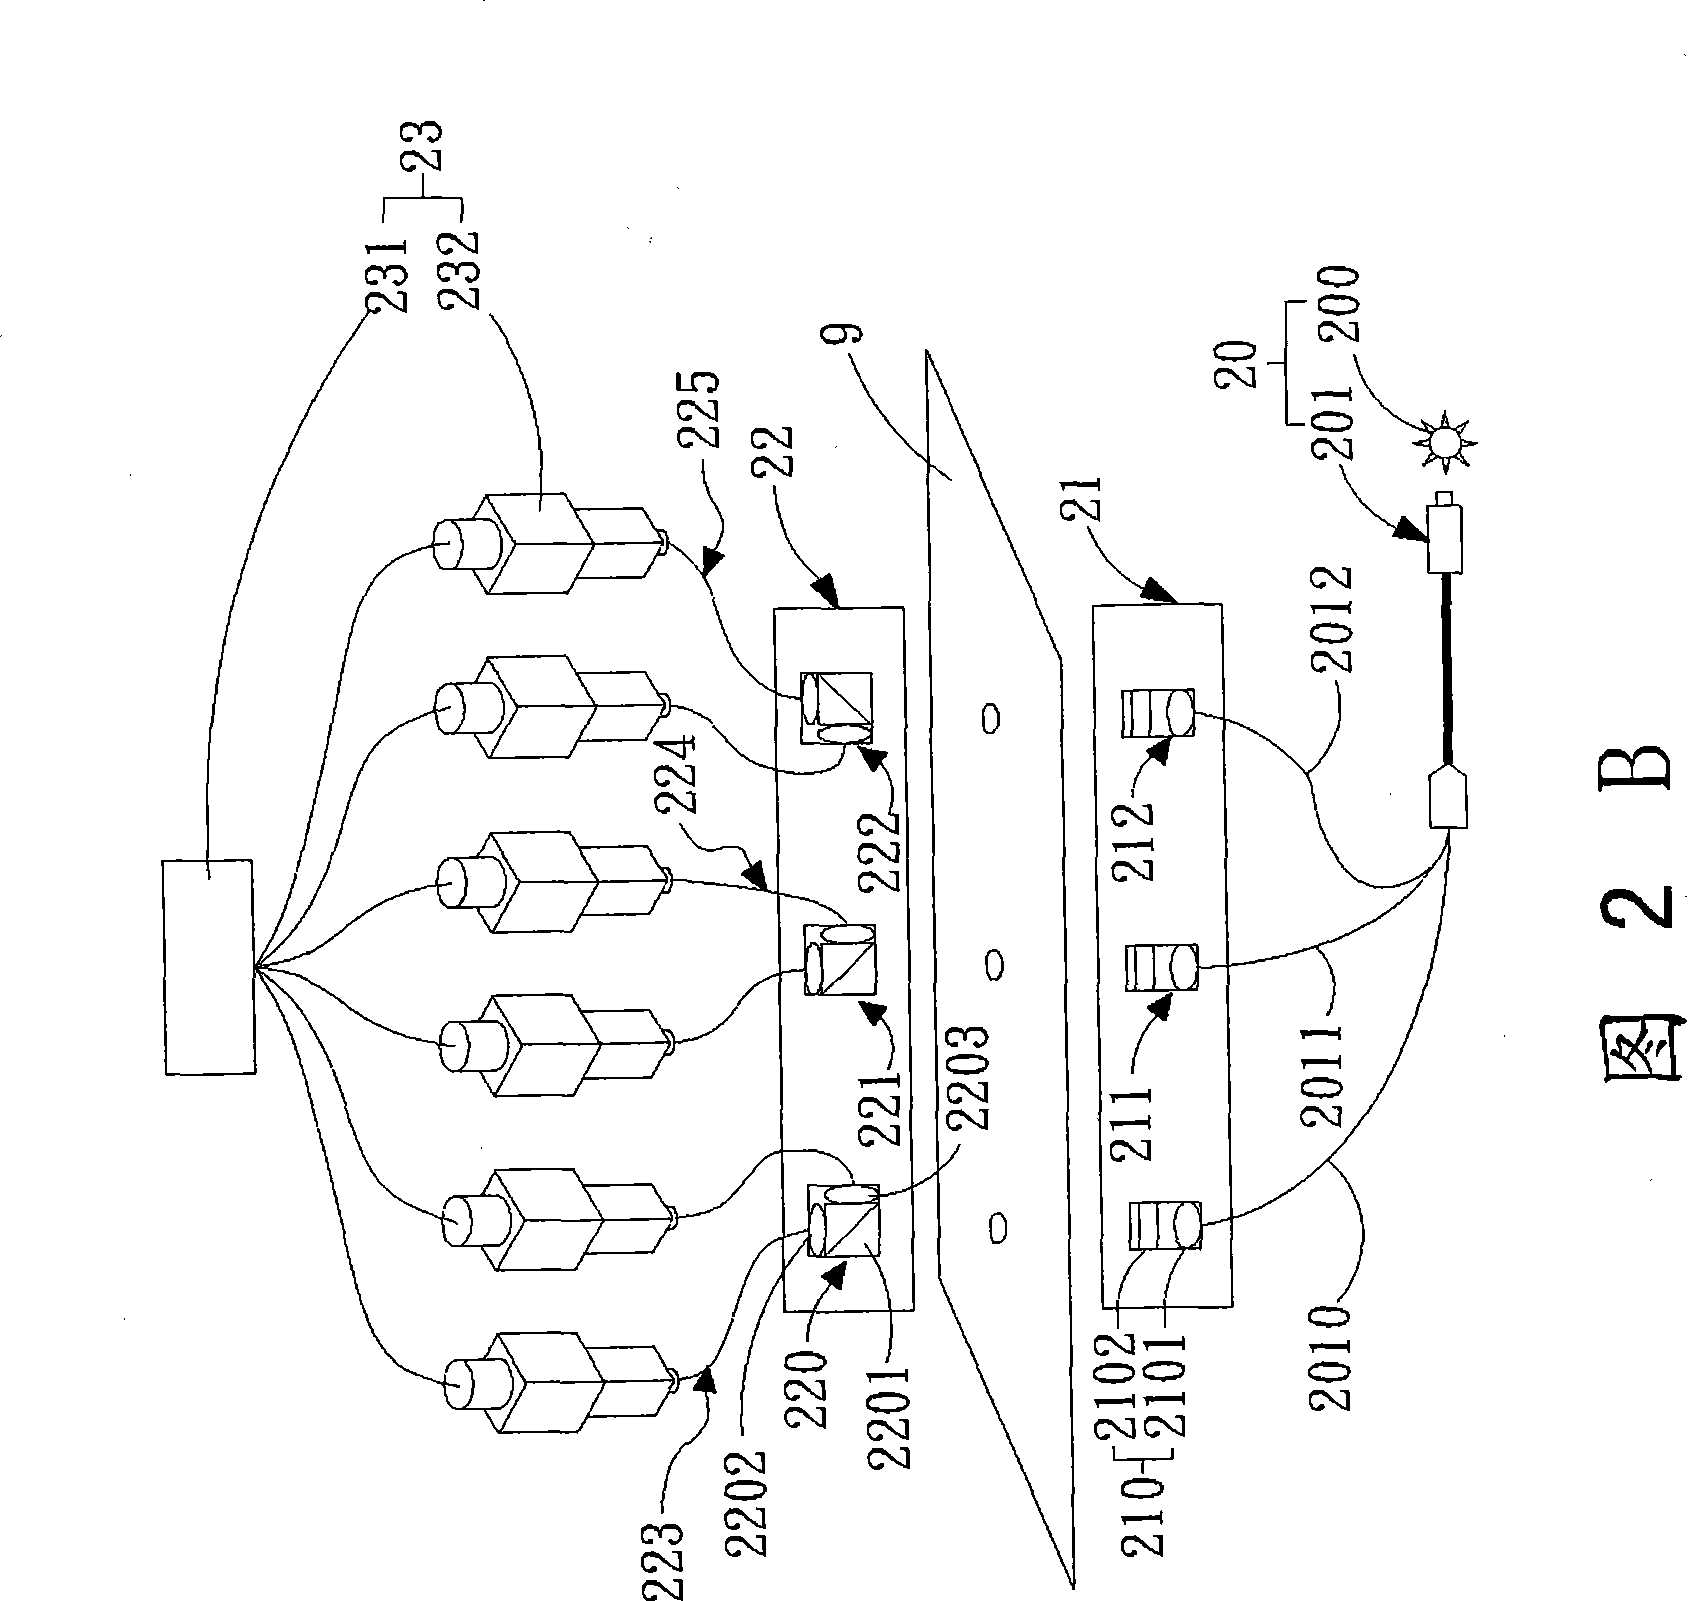 Multi-channel spectral measuring device and phase difference analysis method